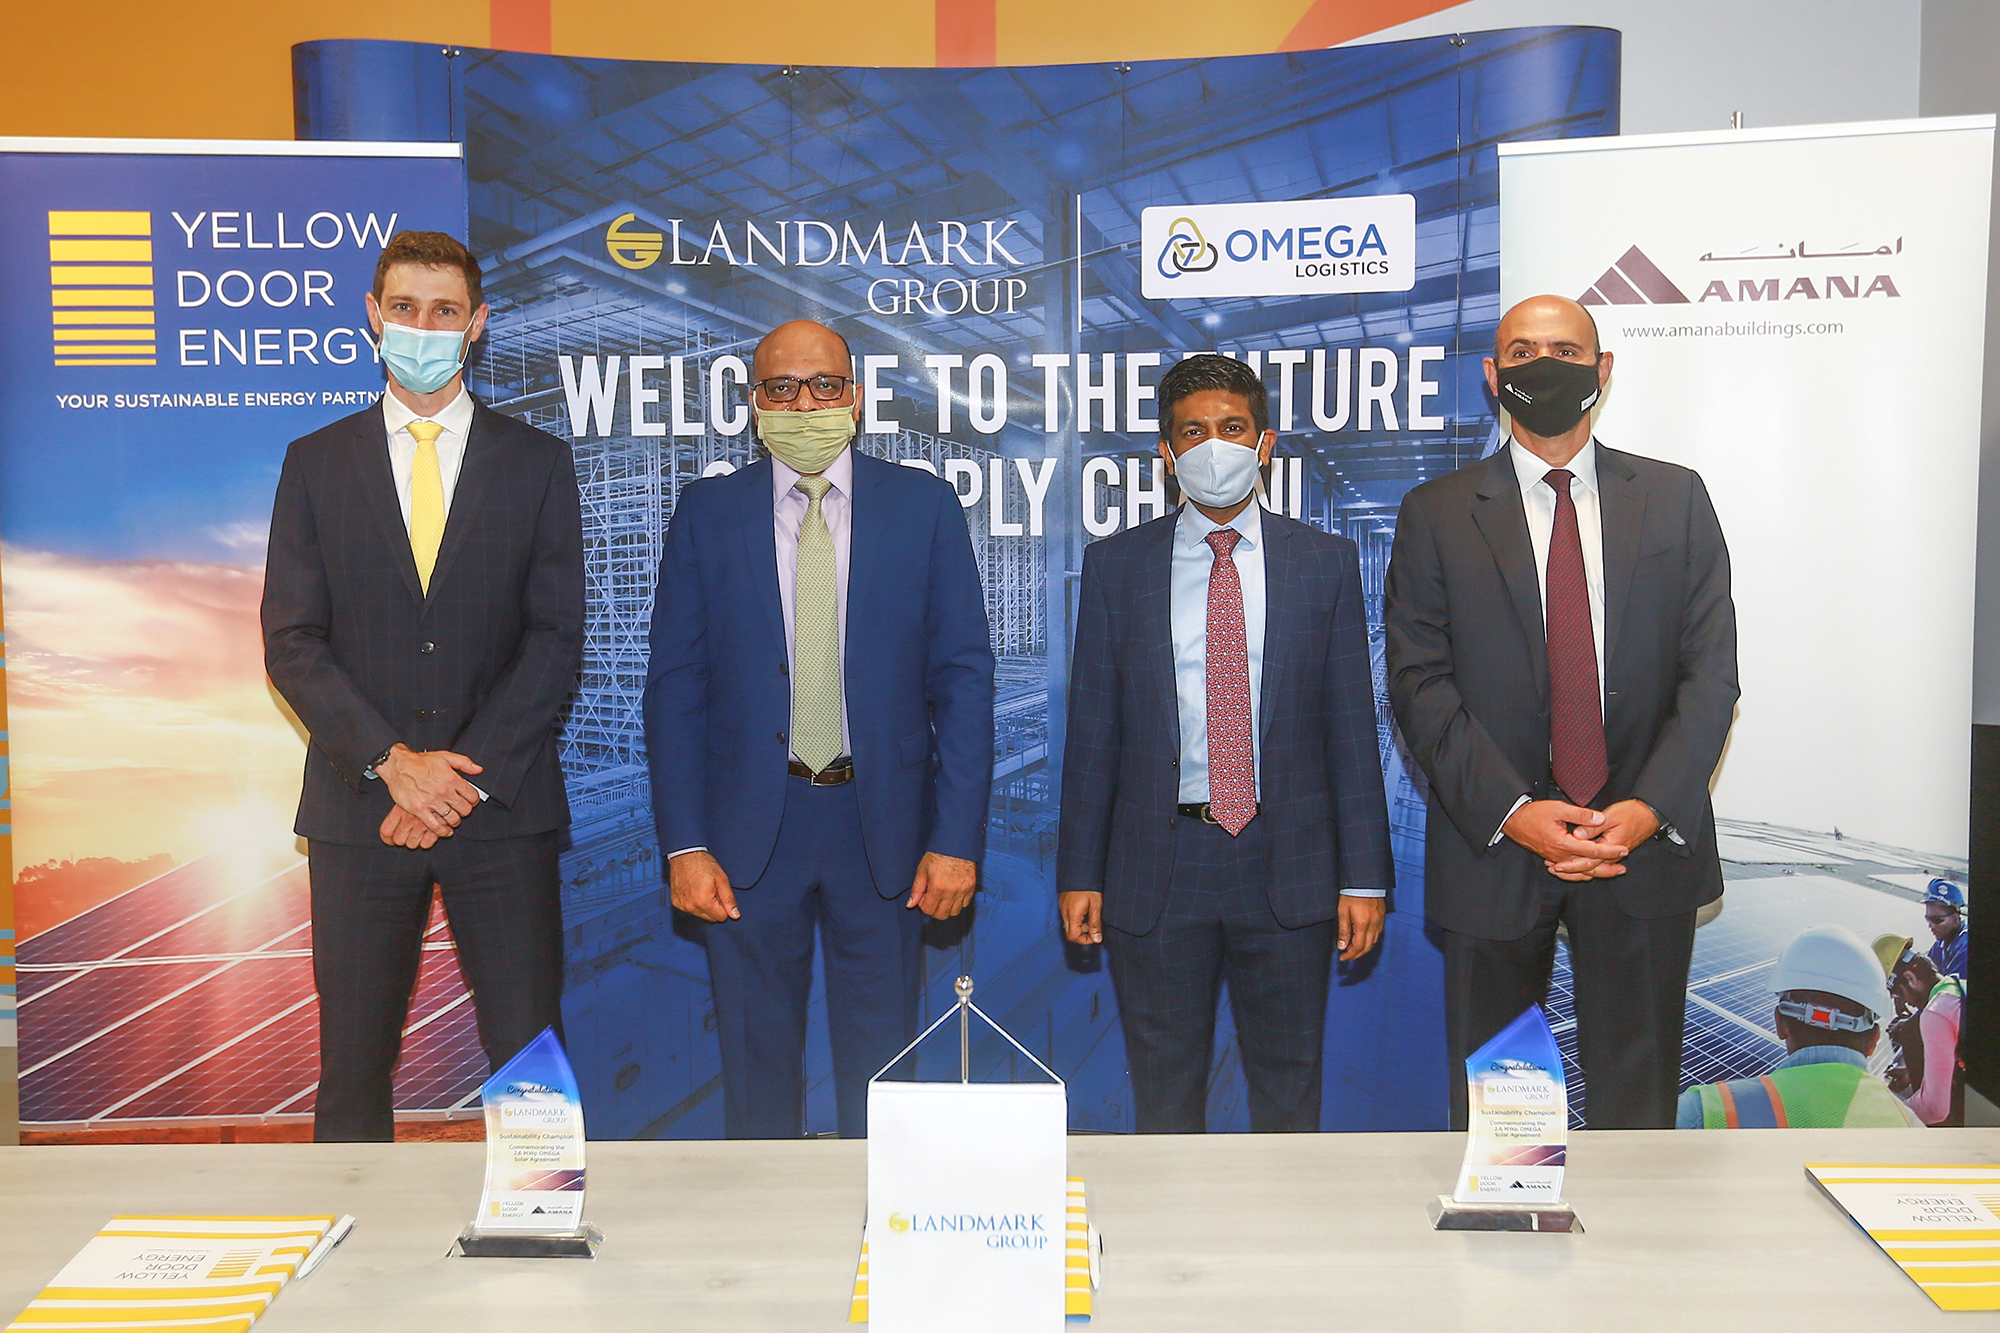 Image for Landmark Group Expands Its Solar Ambition, Signs 2.6MWp Solar Deal With Yellow Door Energy And AMANA Investments